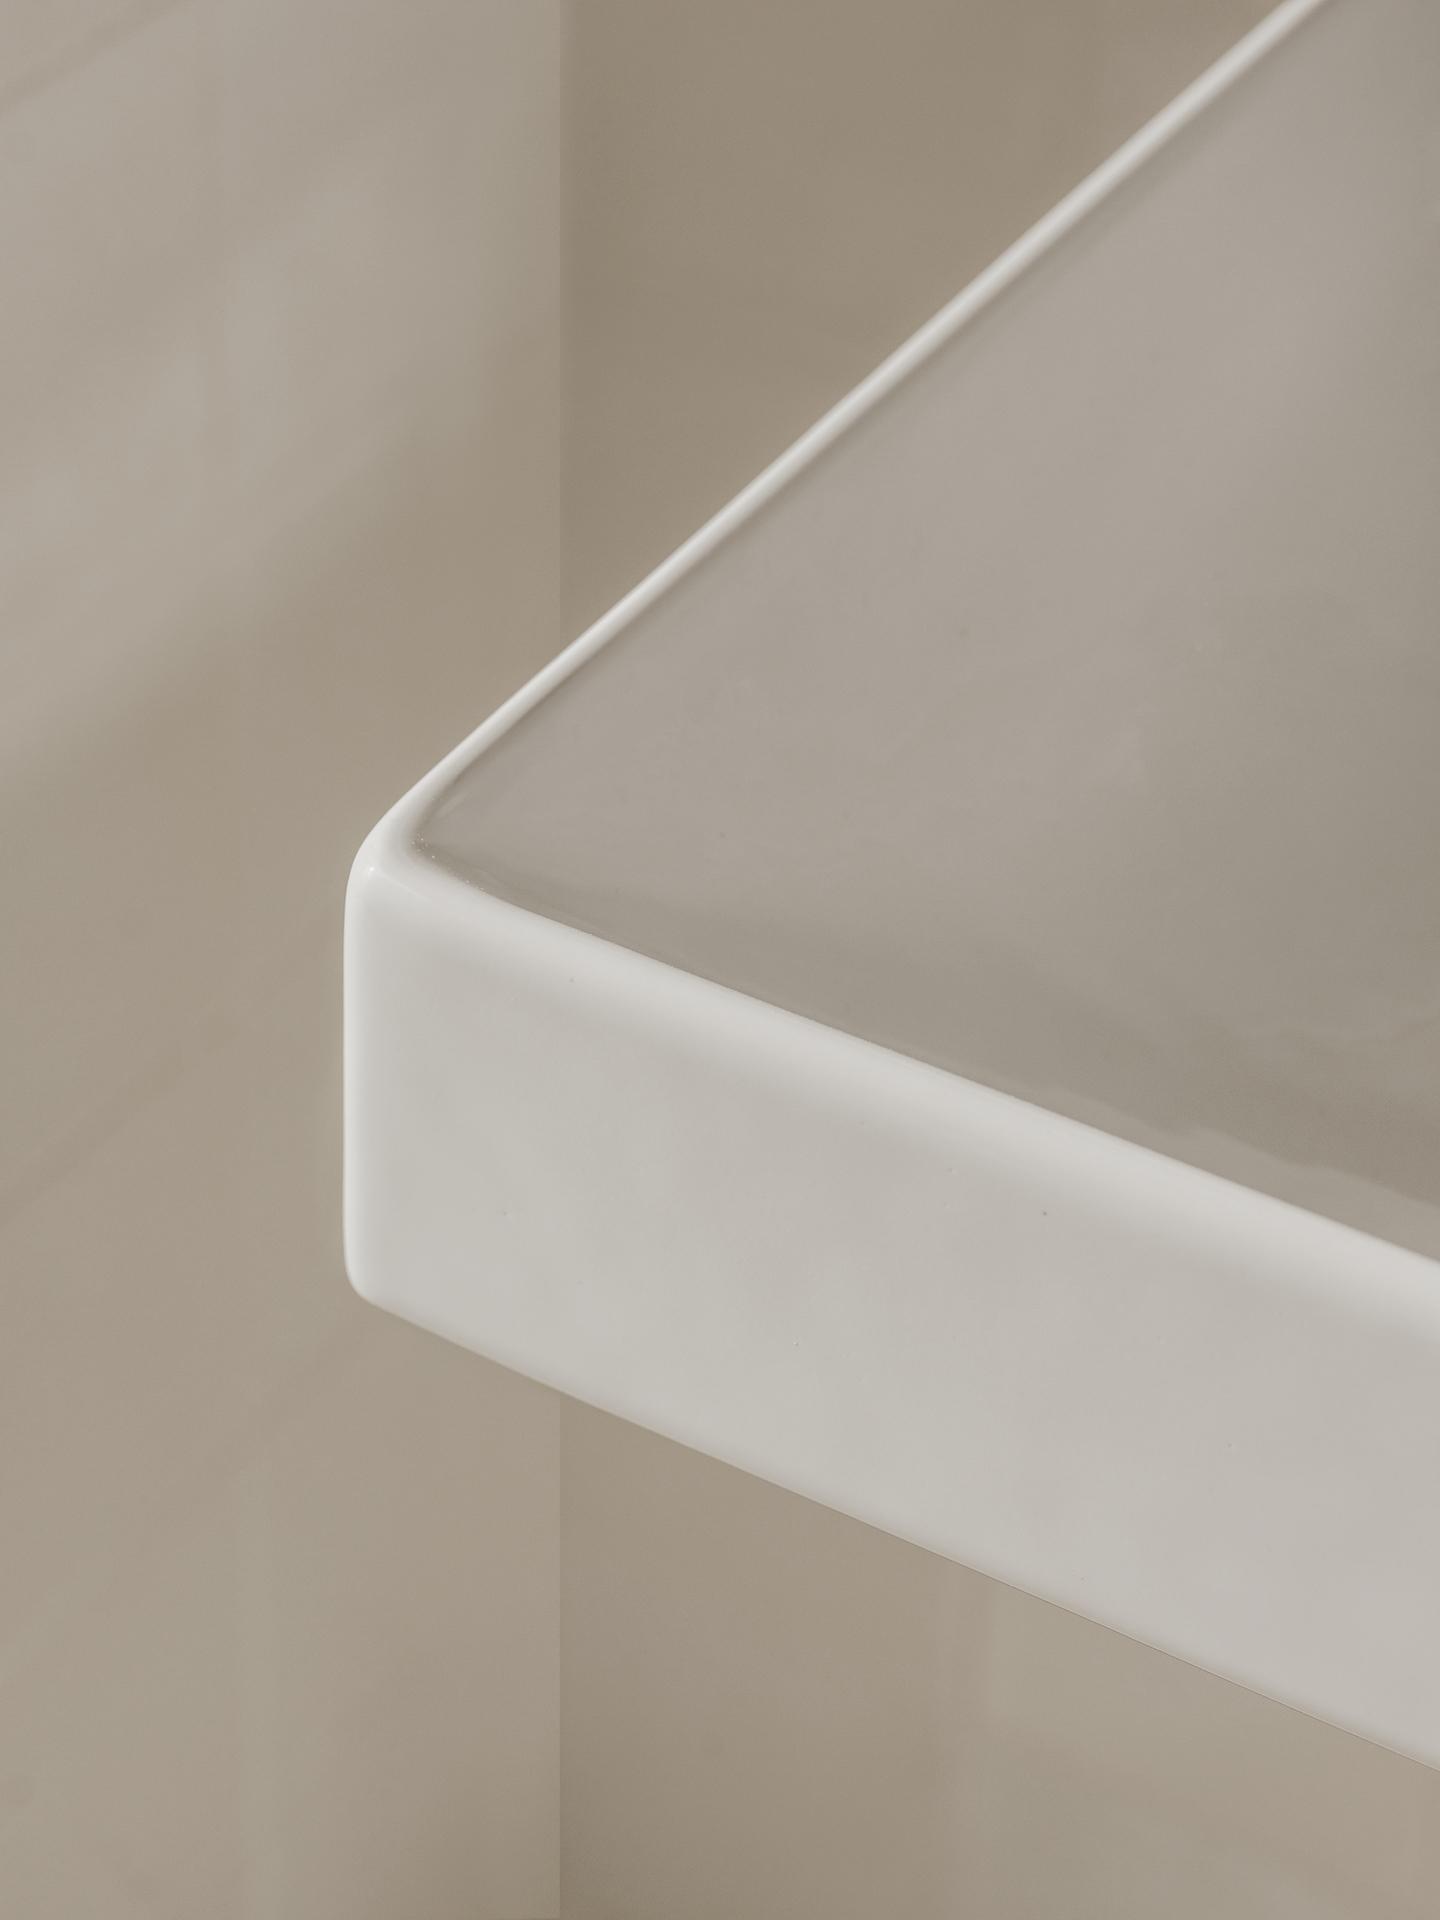 Infuse Mediterranean Style into Your Bathroom with Roca’s Ona Collection 